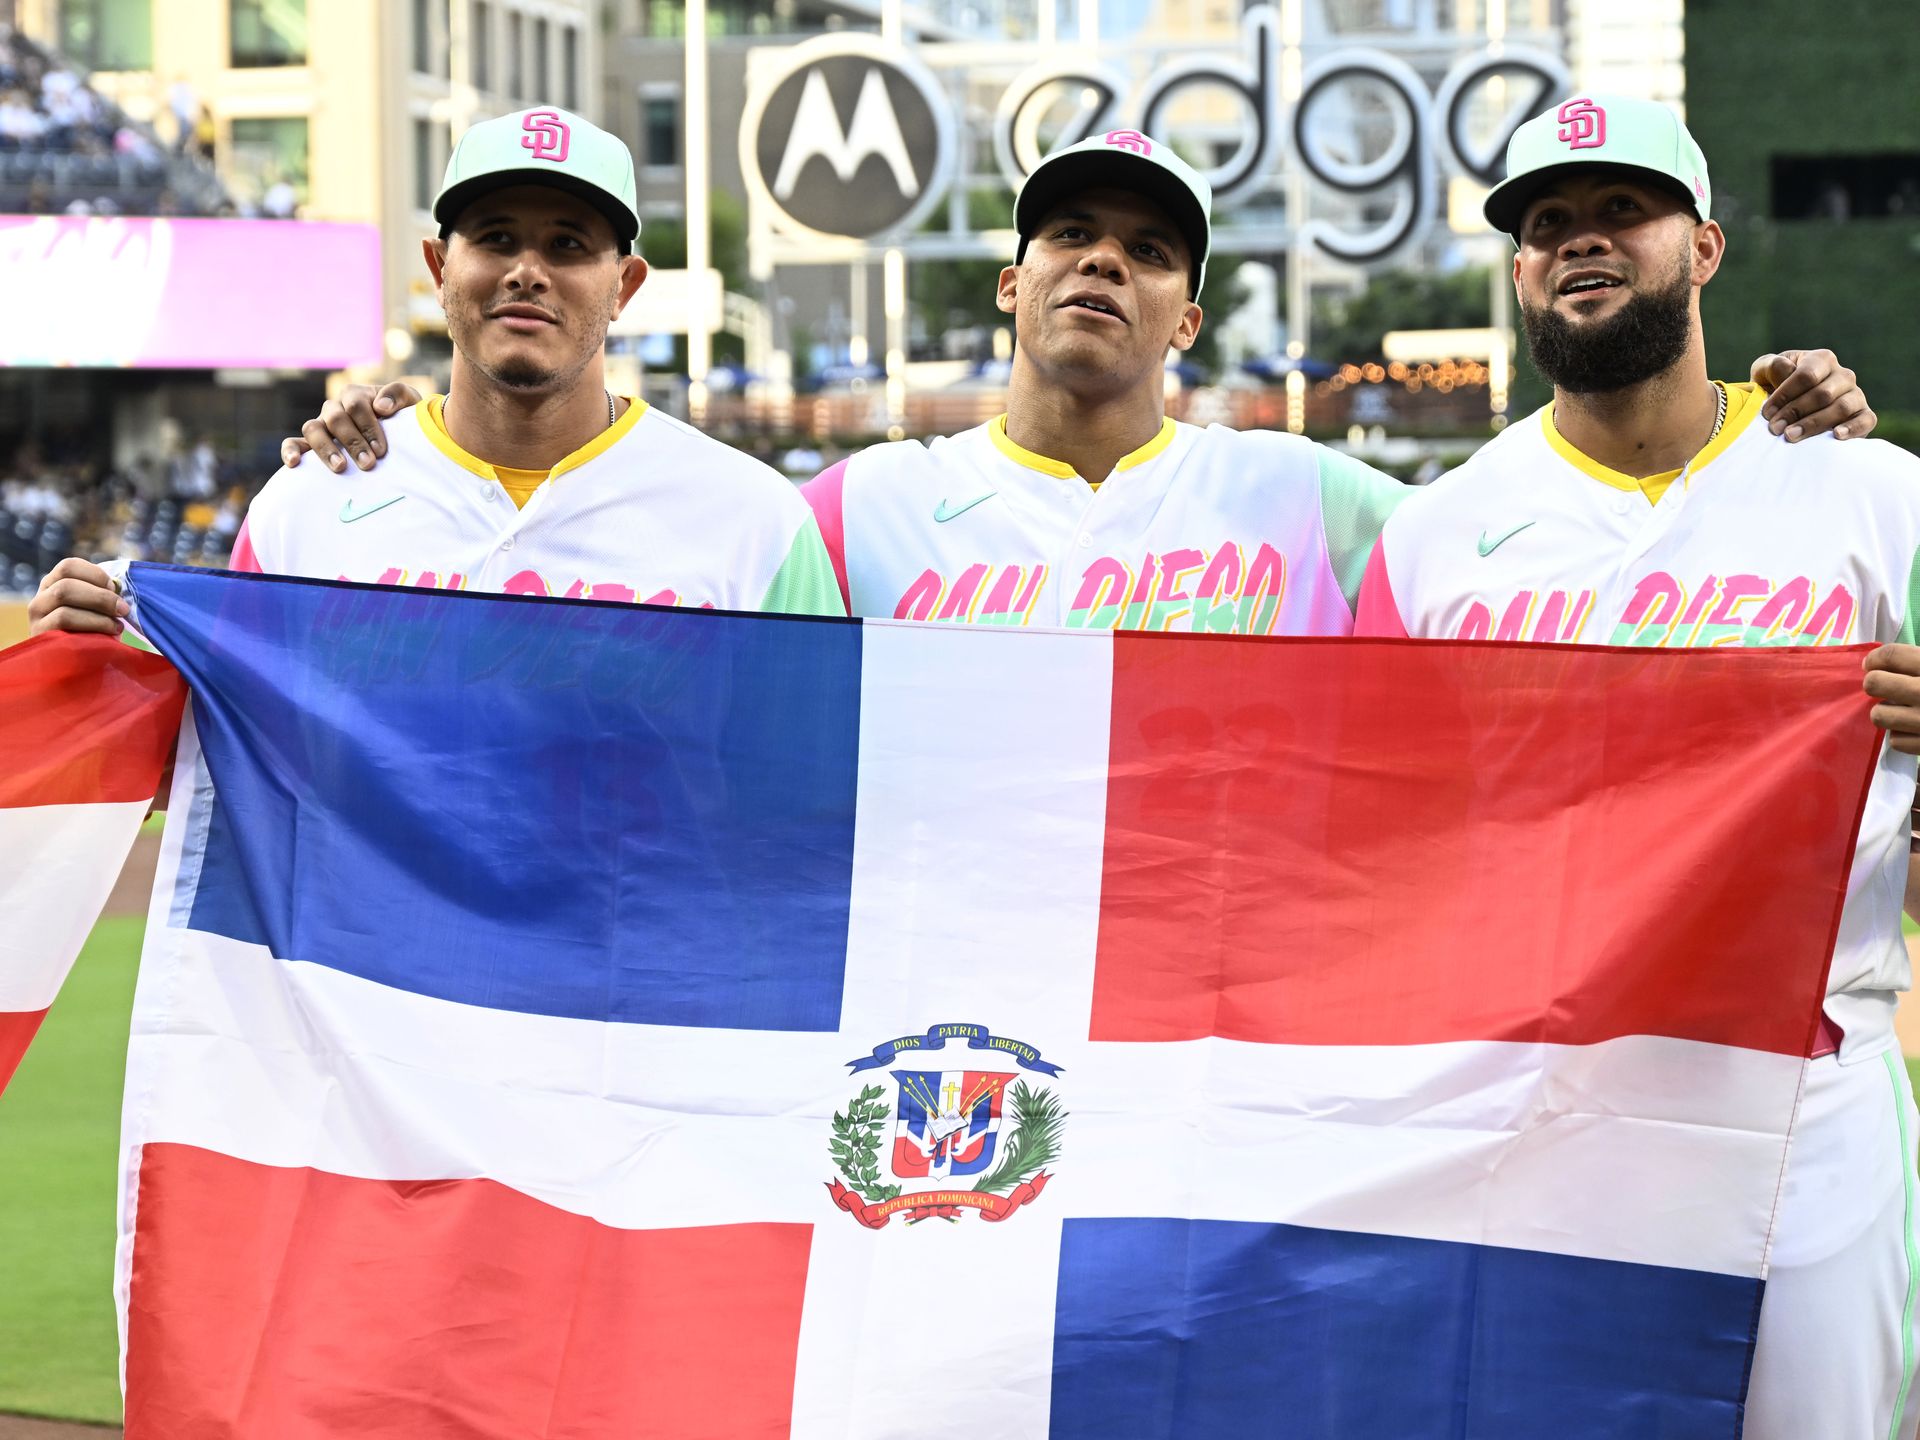 Scoop: Dominican Republic snags first MLB players union office outside U.S.